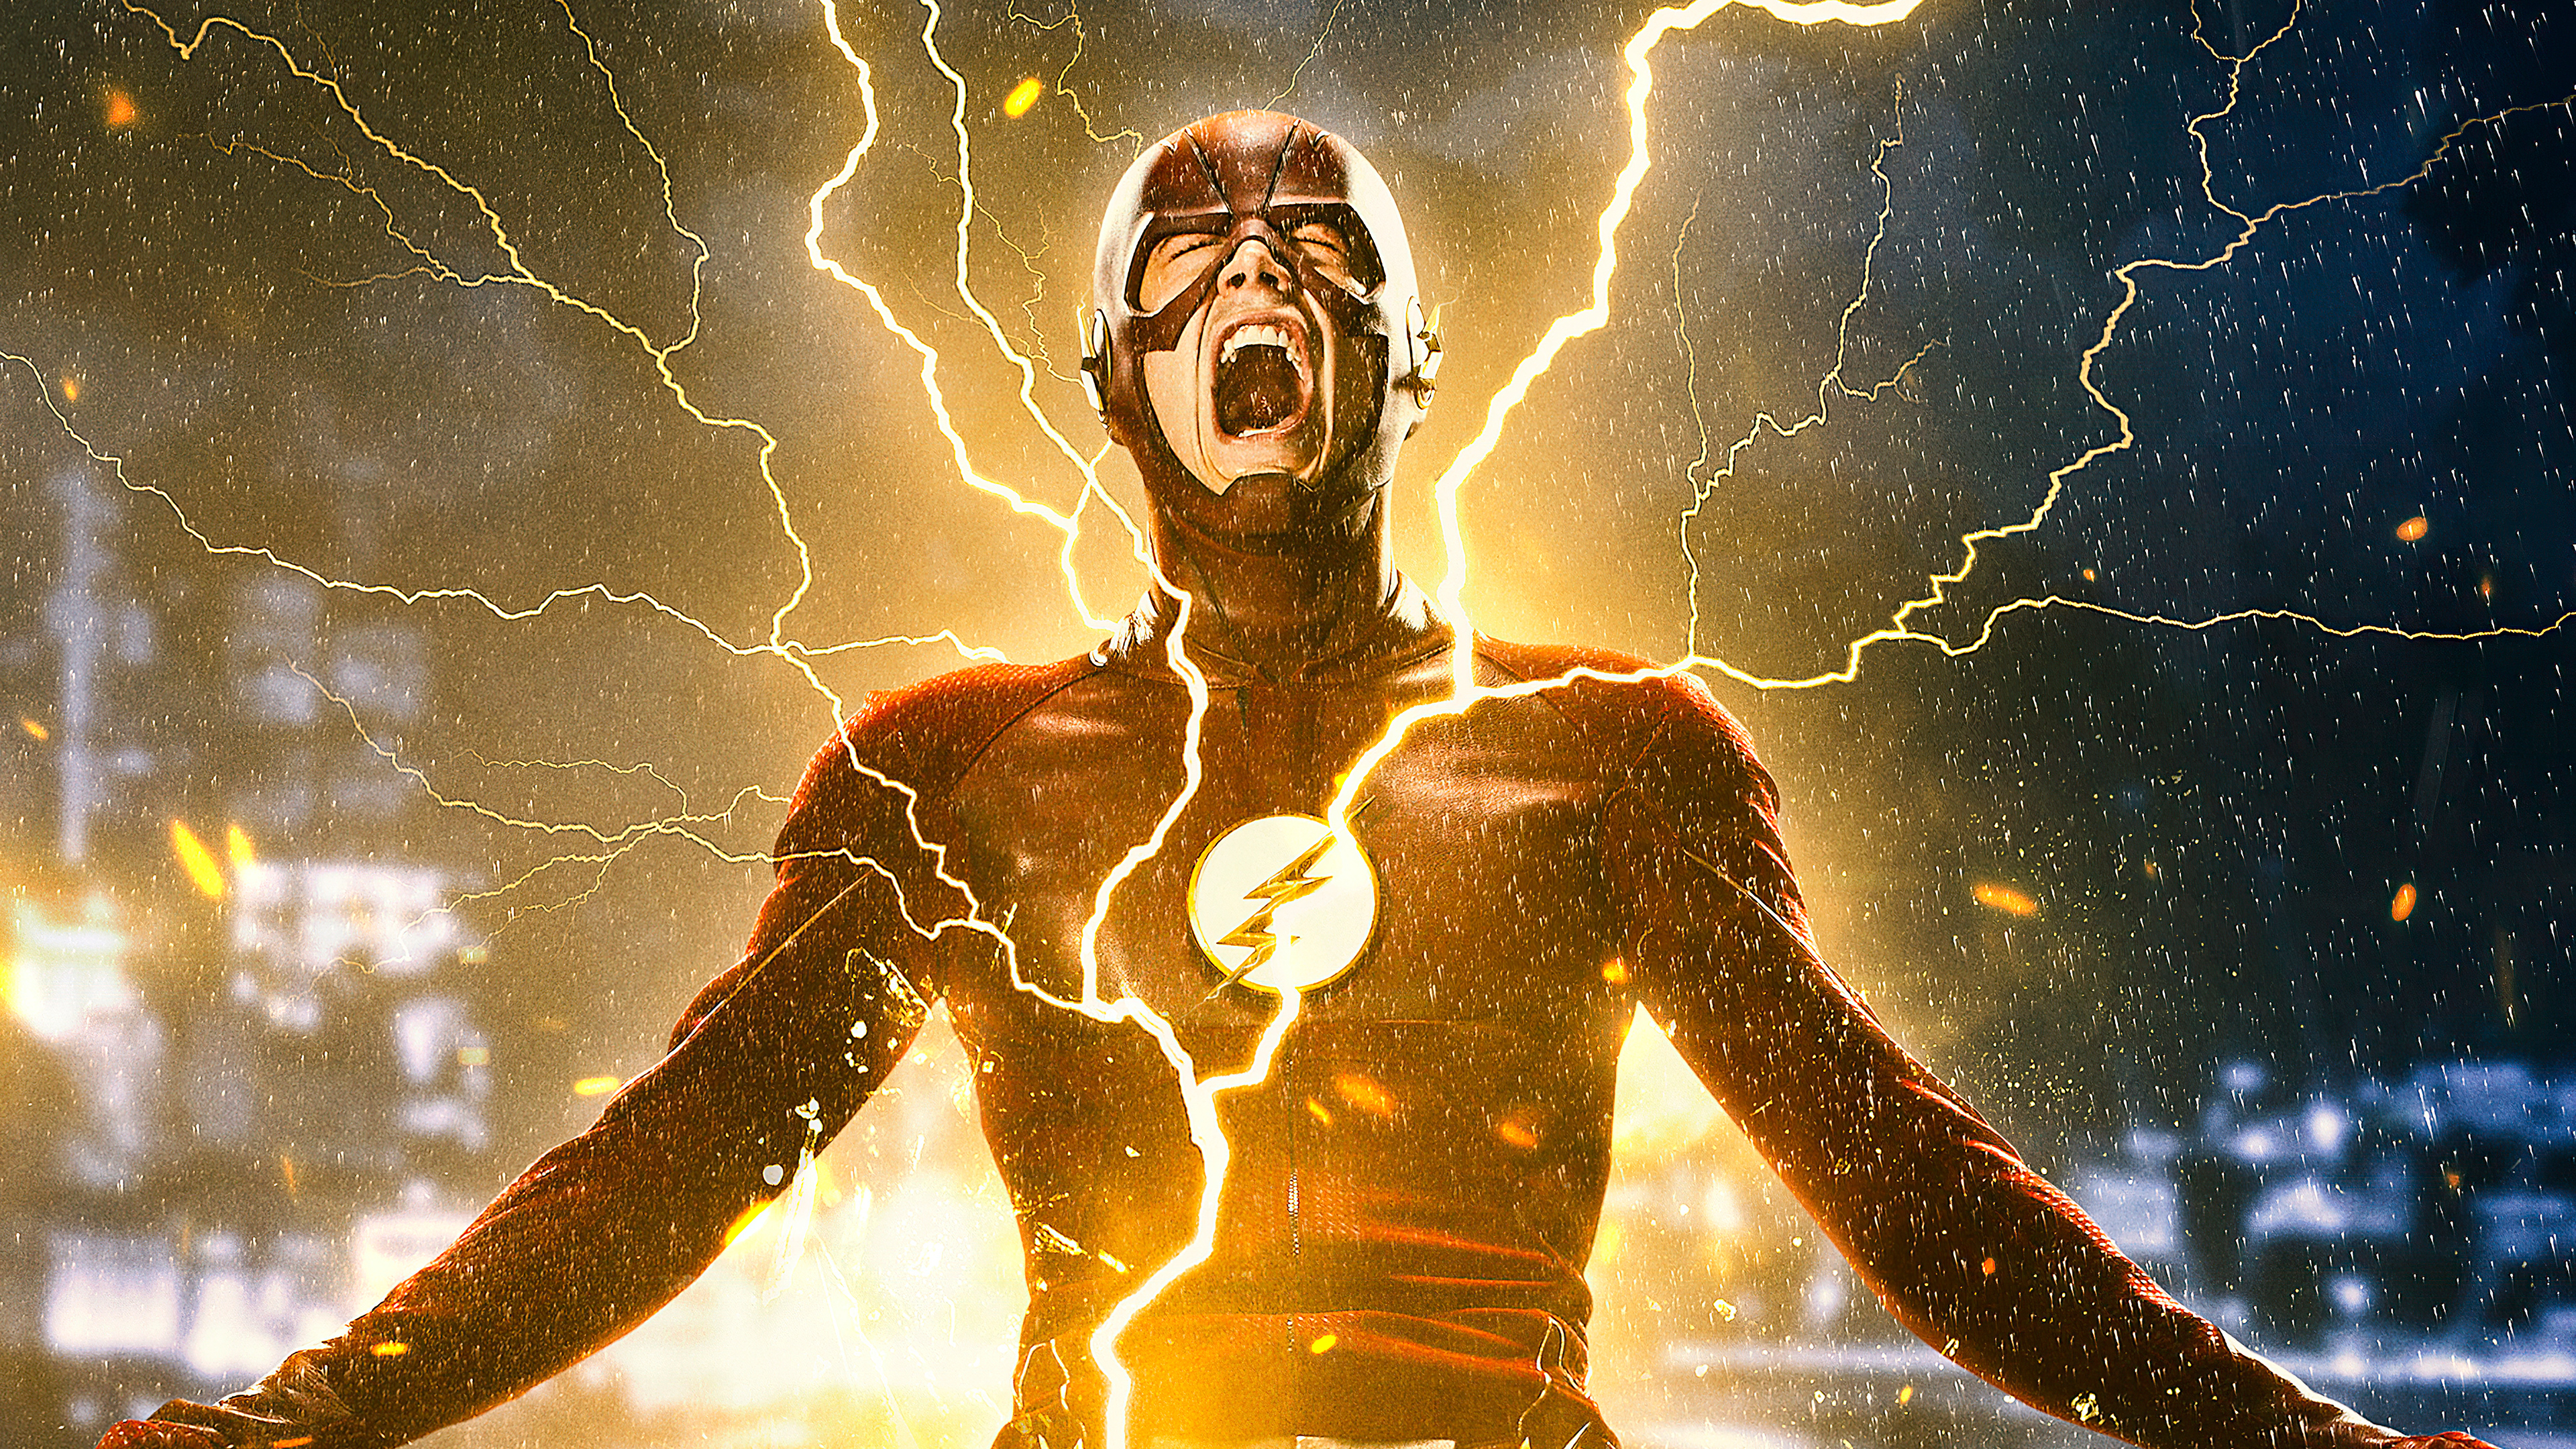 The Flash 2020 Wallpapers